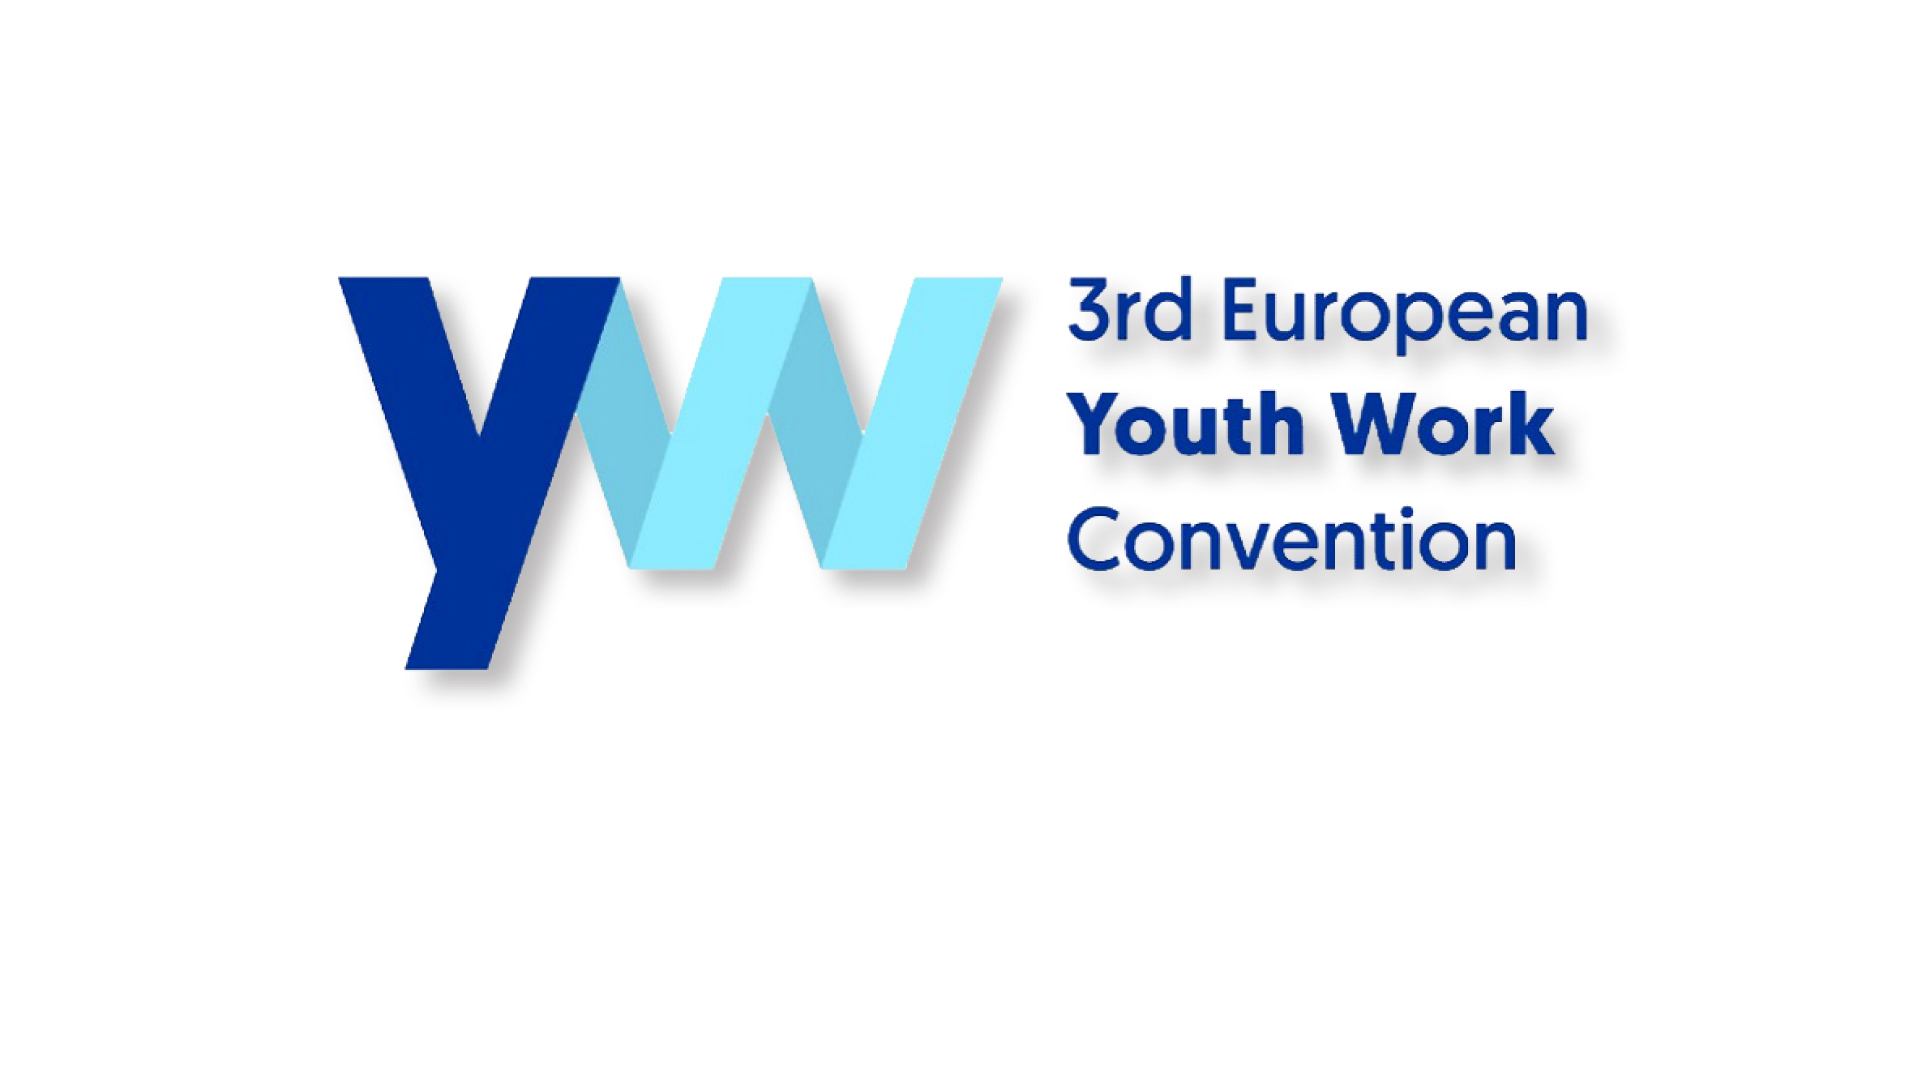 The 3rd European Youth Work Convention